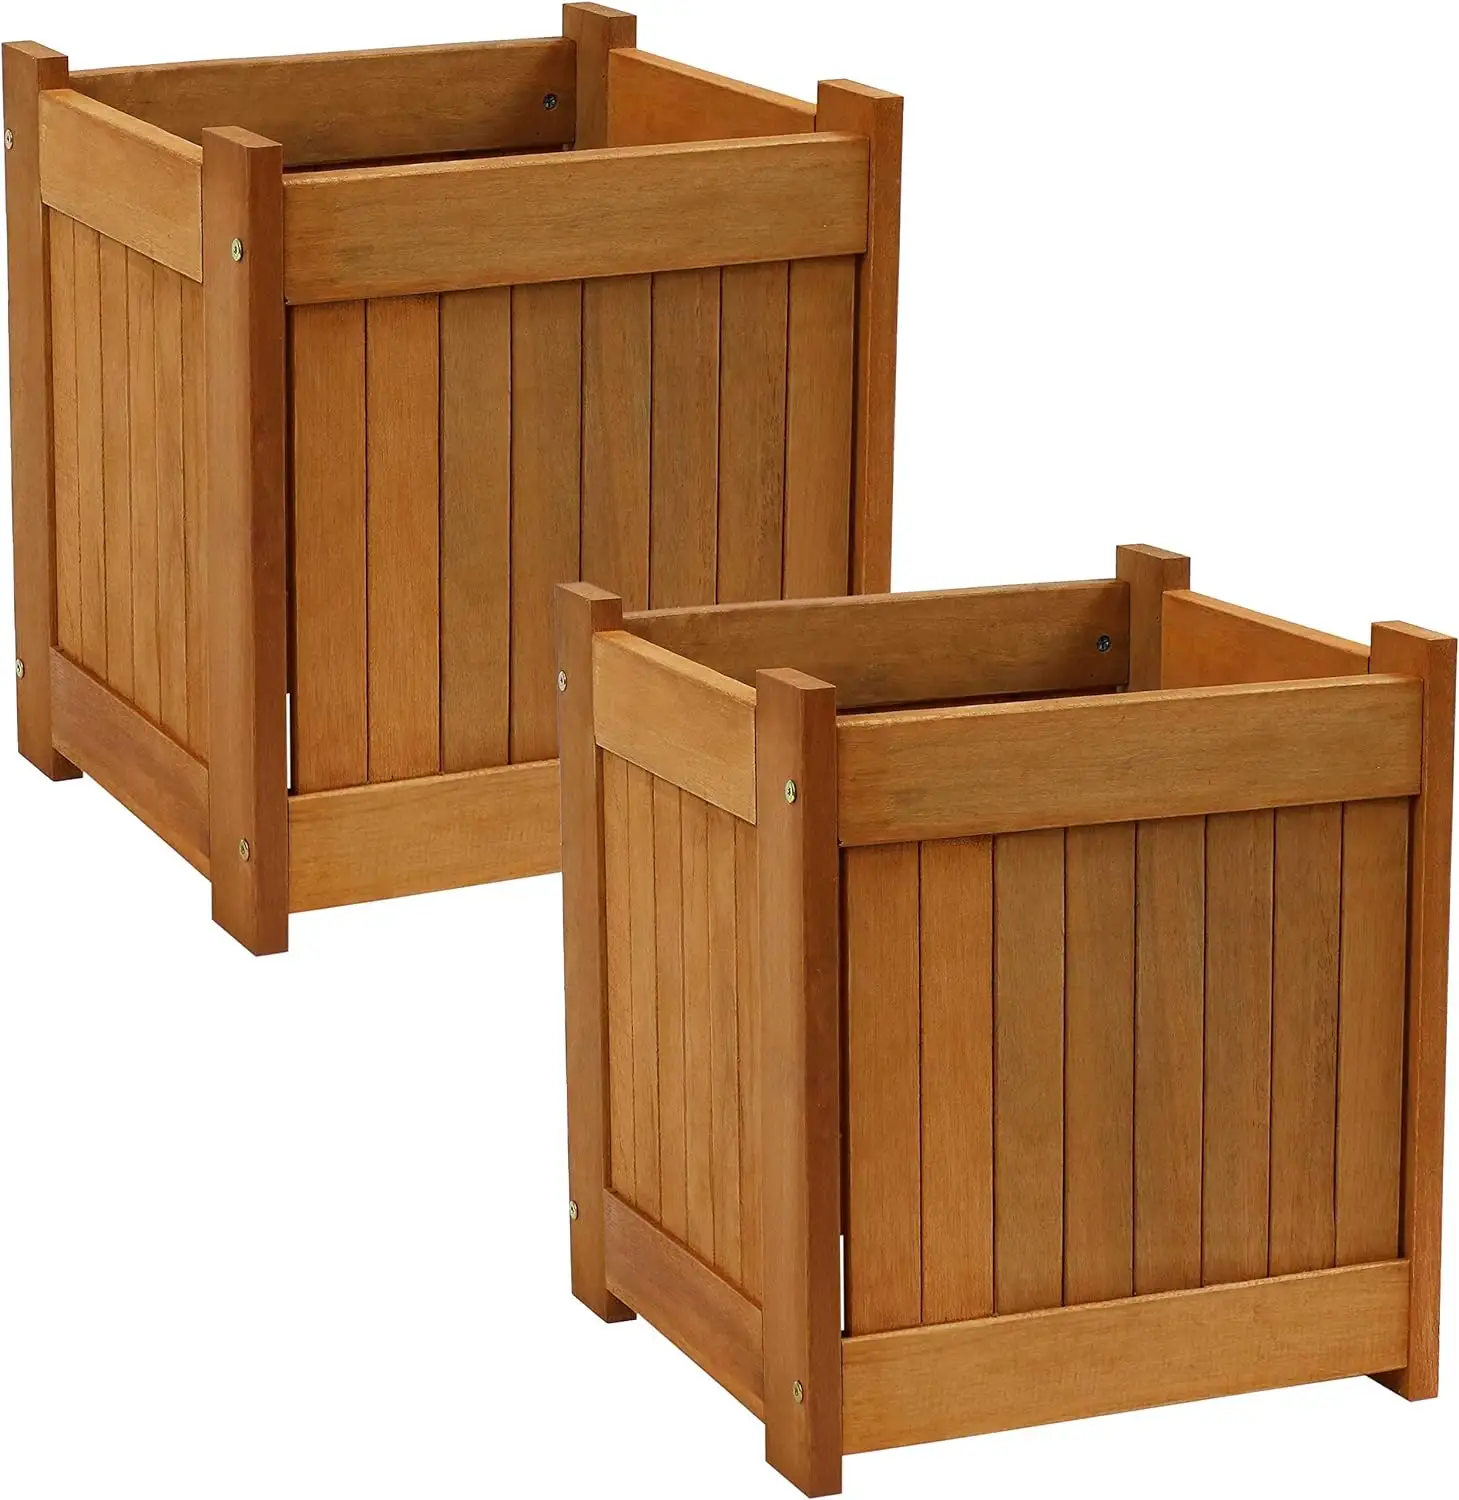 Wooden square planter box -2 piece set is perfect for growing your favorite plants, whether morning glory or other green plants